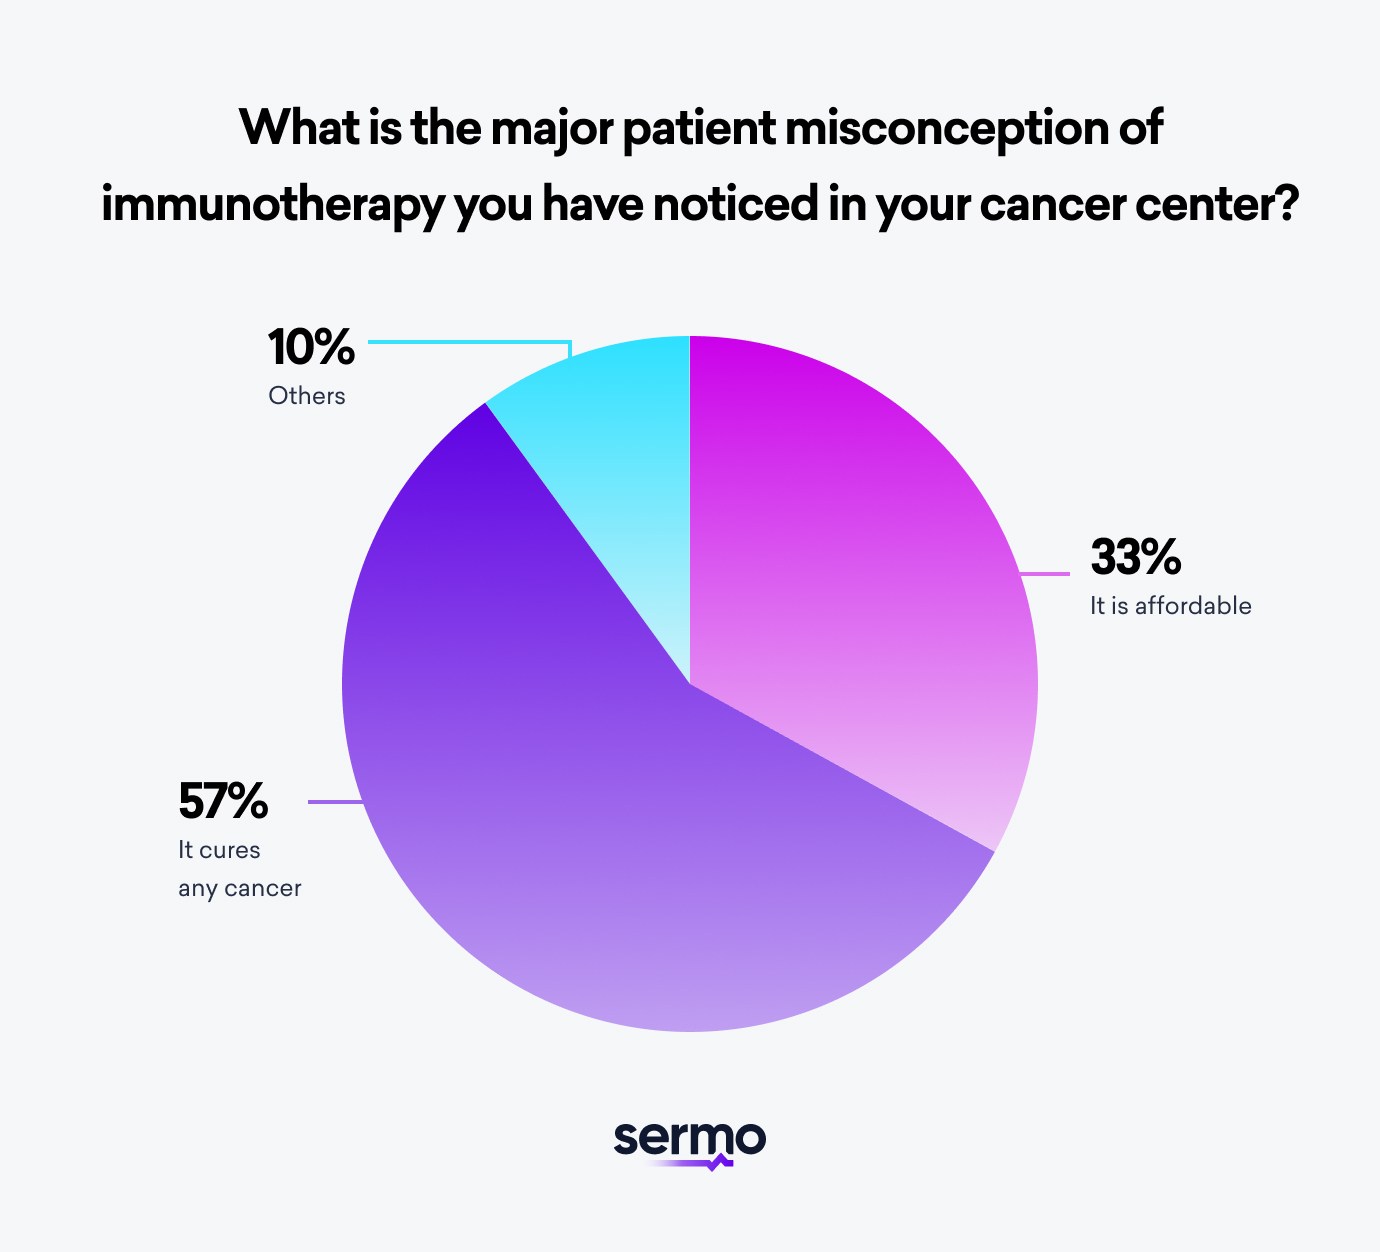 What is the major patient misconception of immunotherapy you have noticed in your cancer center according to doctors.

Common patient misconceptions about targeted therapy directed at immune system cells.